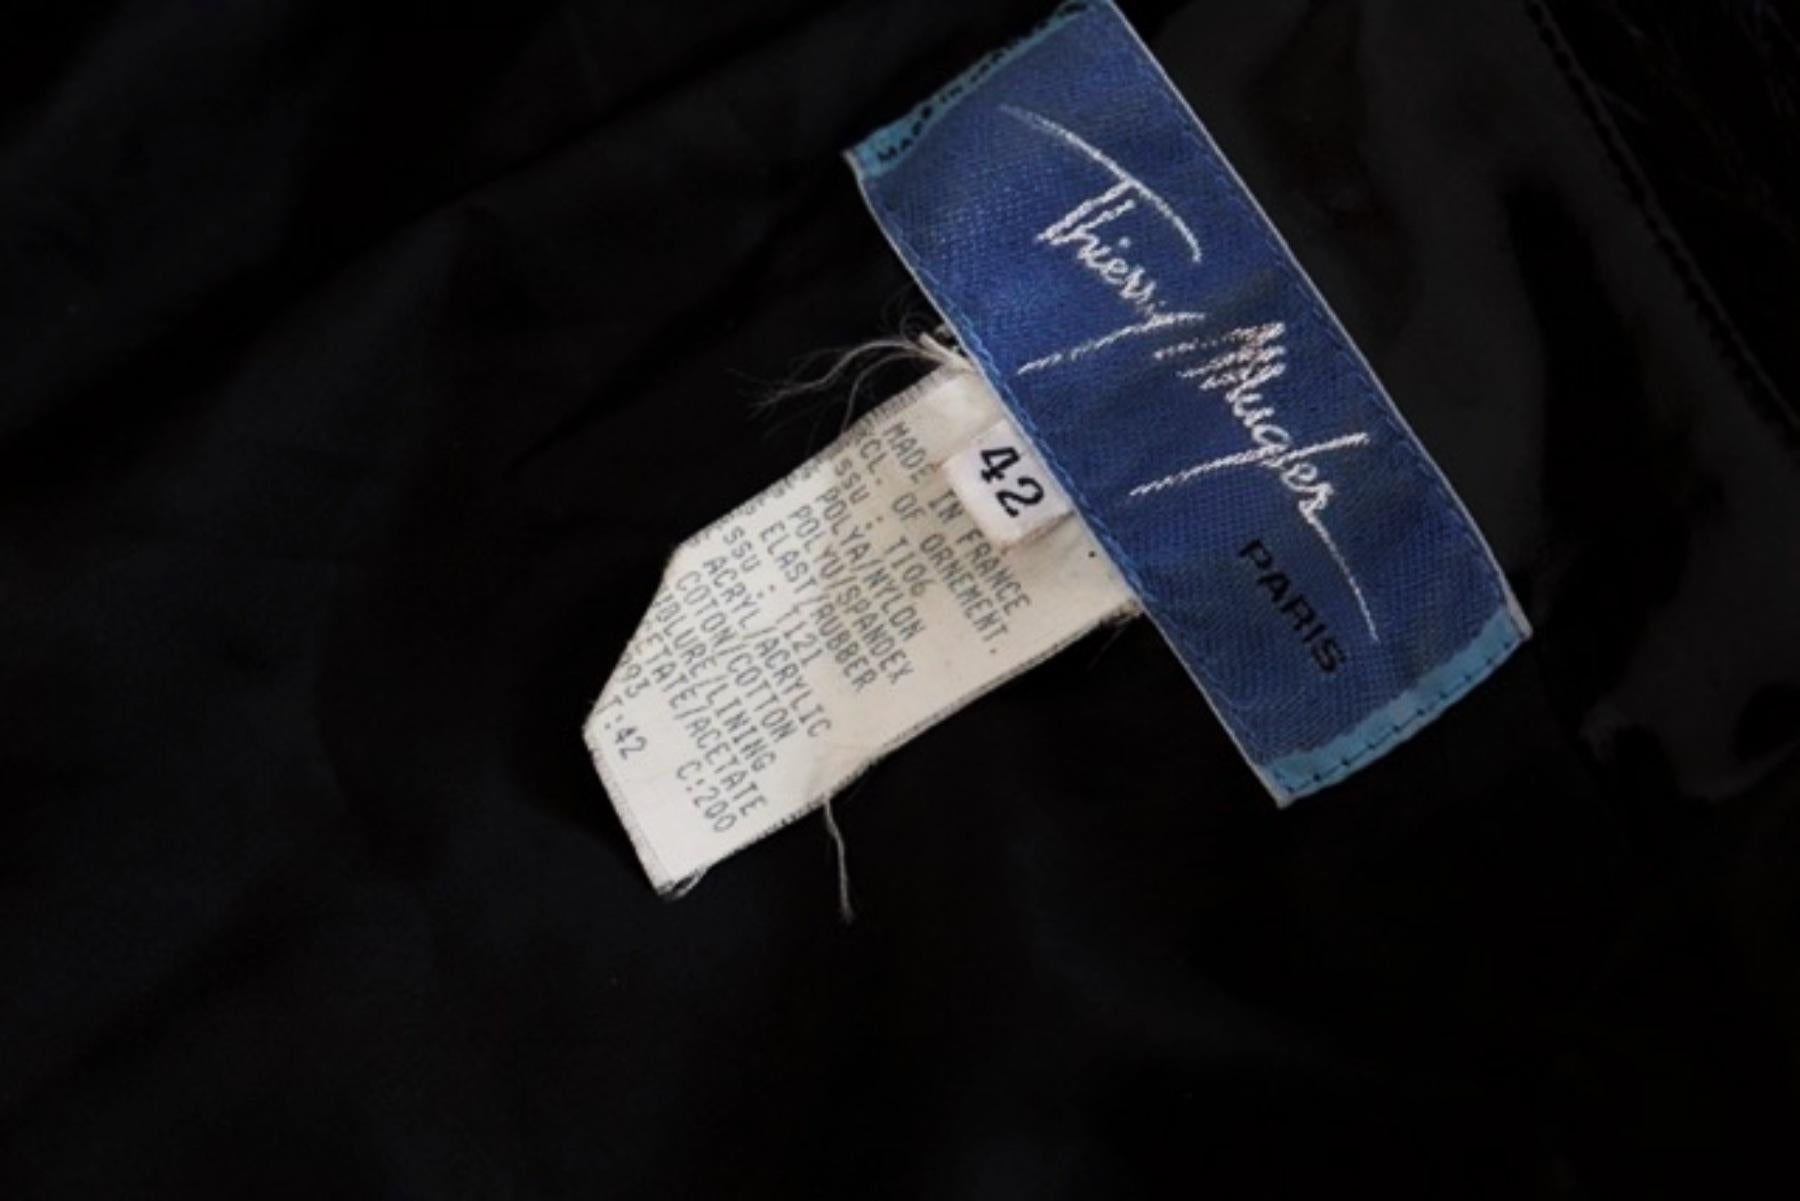 Superb and rare vintage jacket designed by Thierry Mugler in the years 1996, 1997, presented at the Runway Winter Paris fashion show 1996-1997.
ORIGINAL LABEL.
The jacket is entirely made of shiny black latex material, very beautiful and